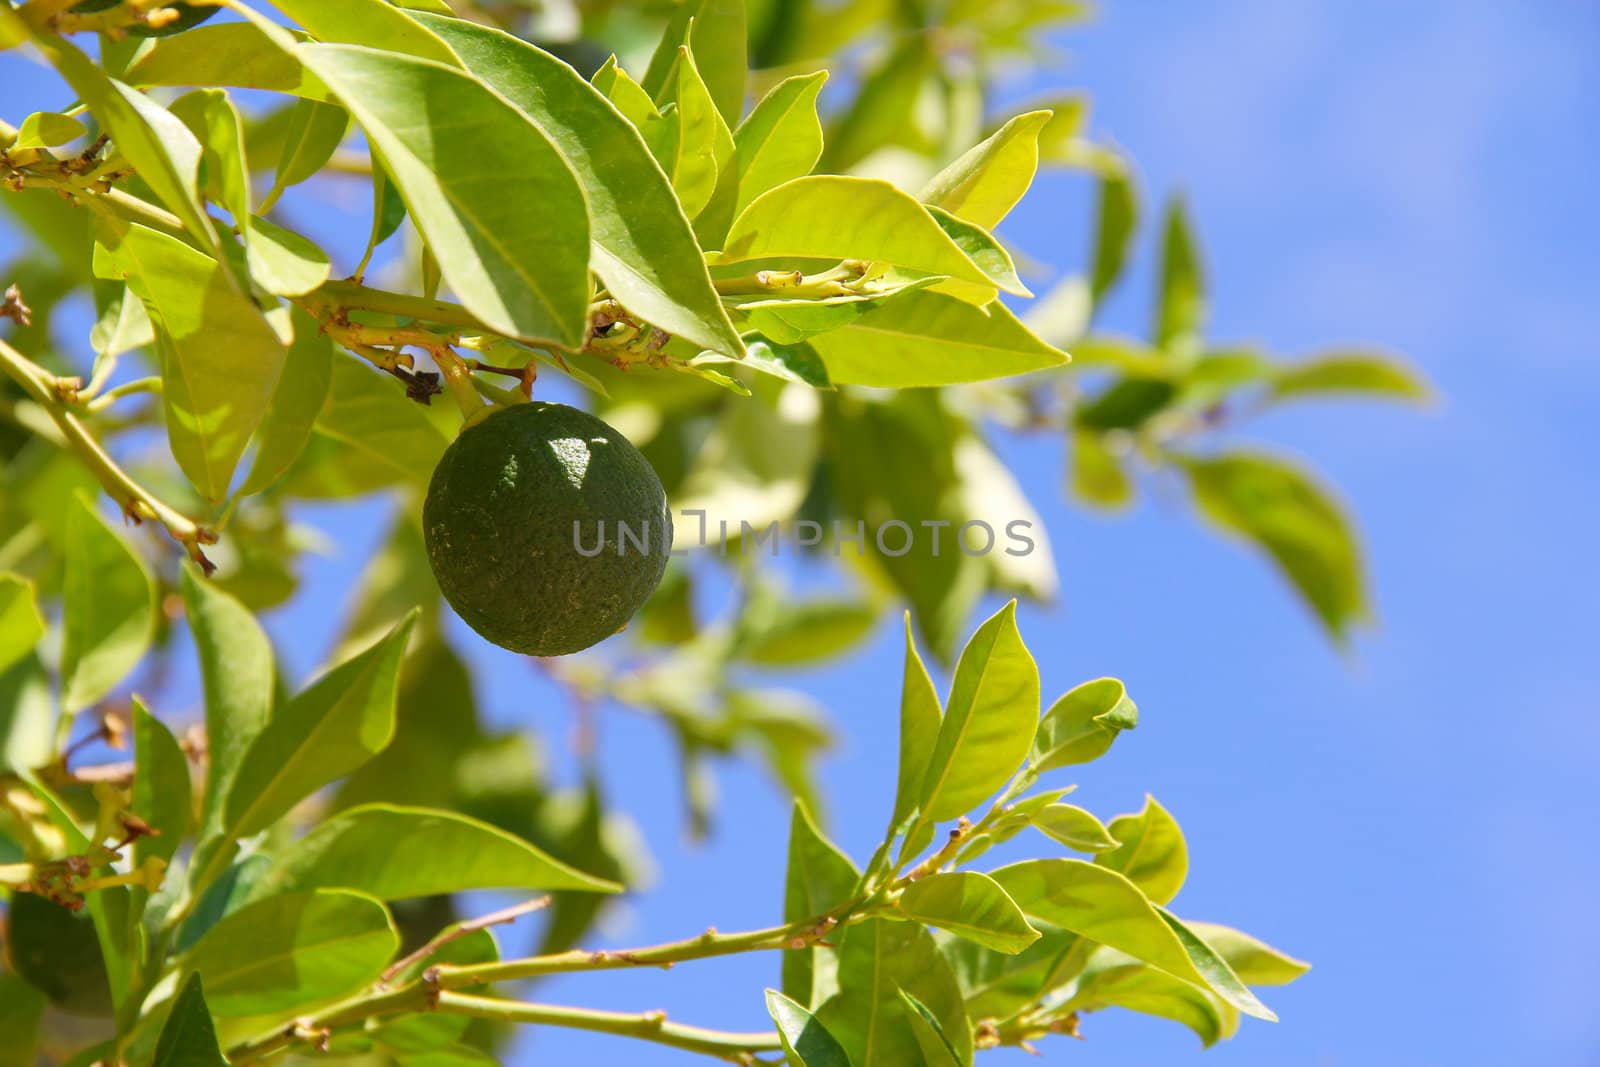 Fresh green limes on garden tree close up